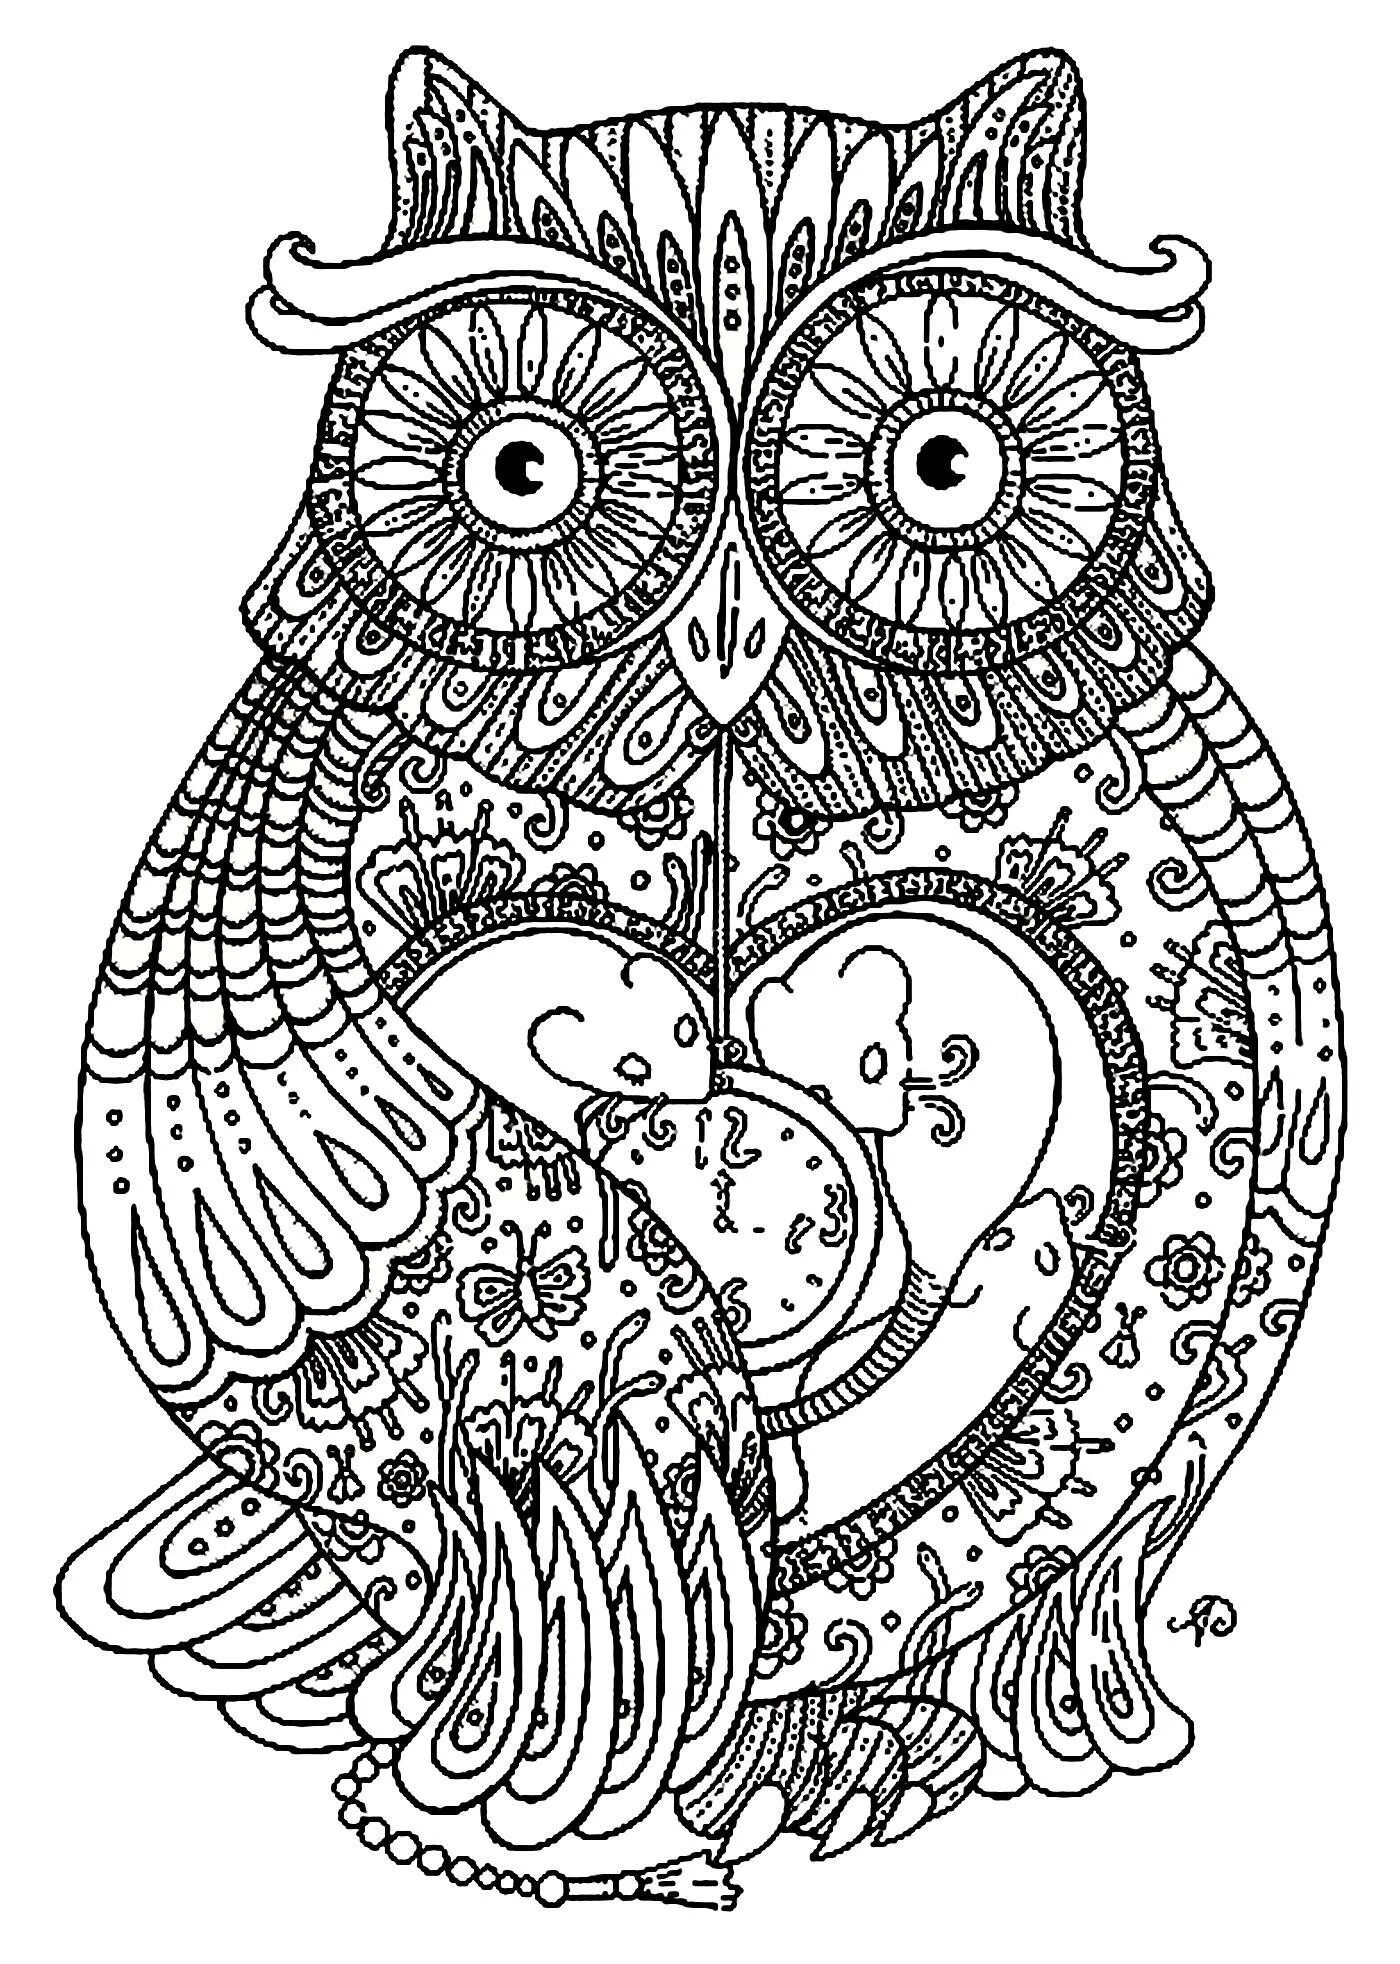 Dramatic coloring complex owl